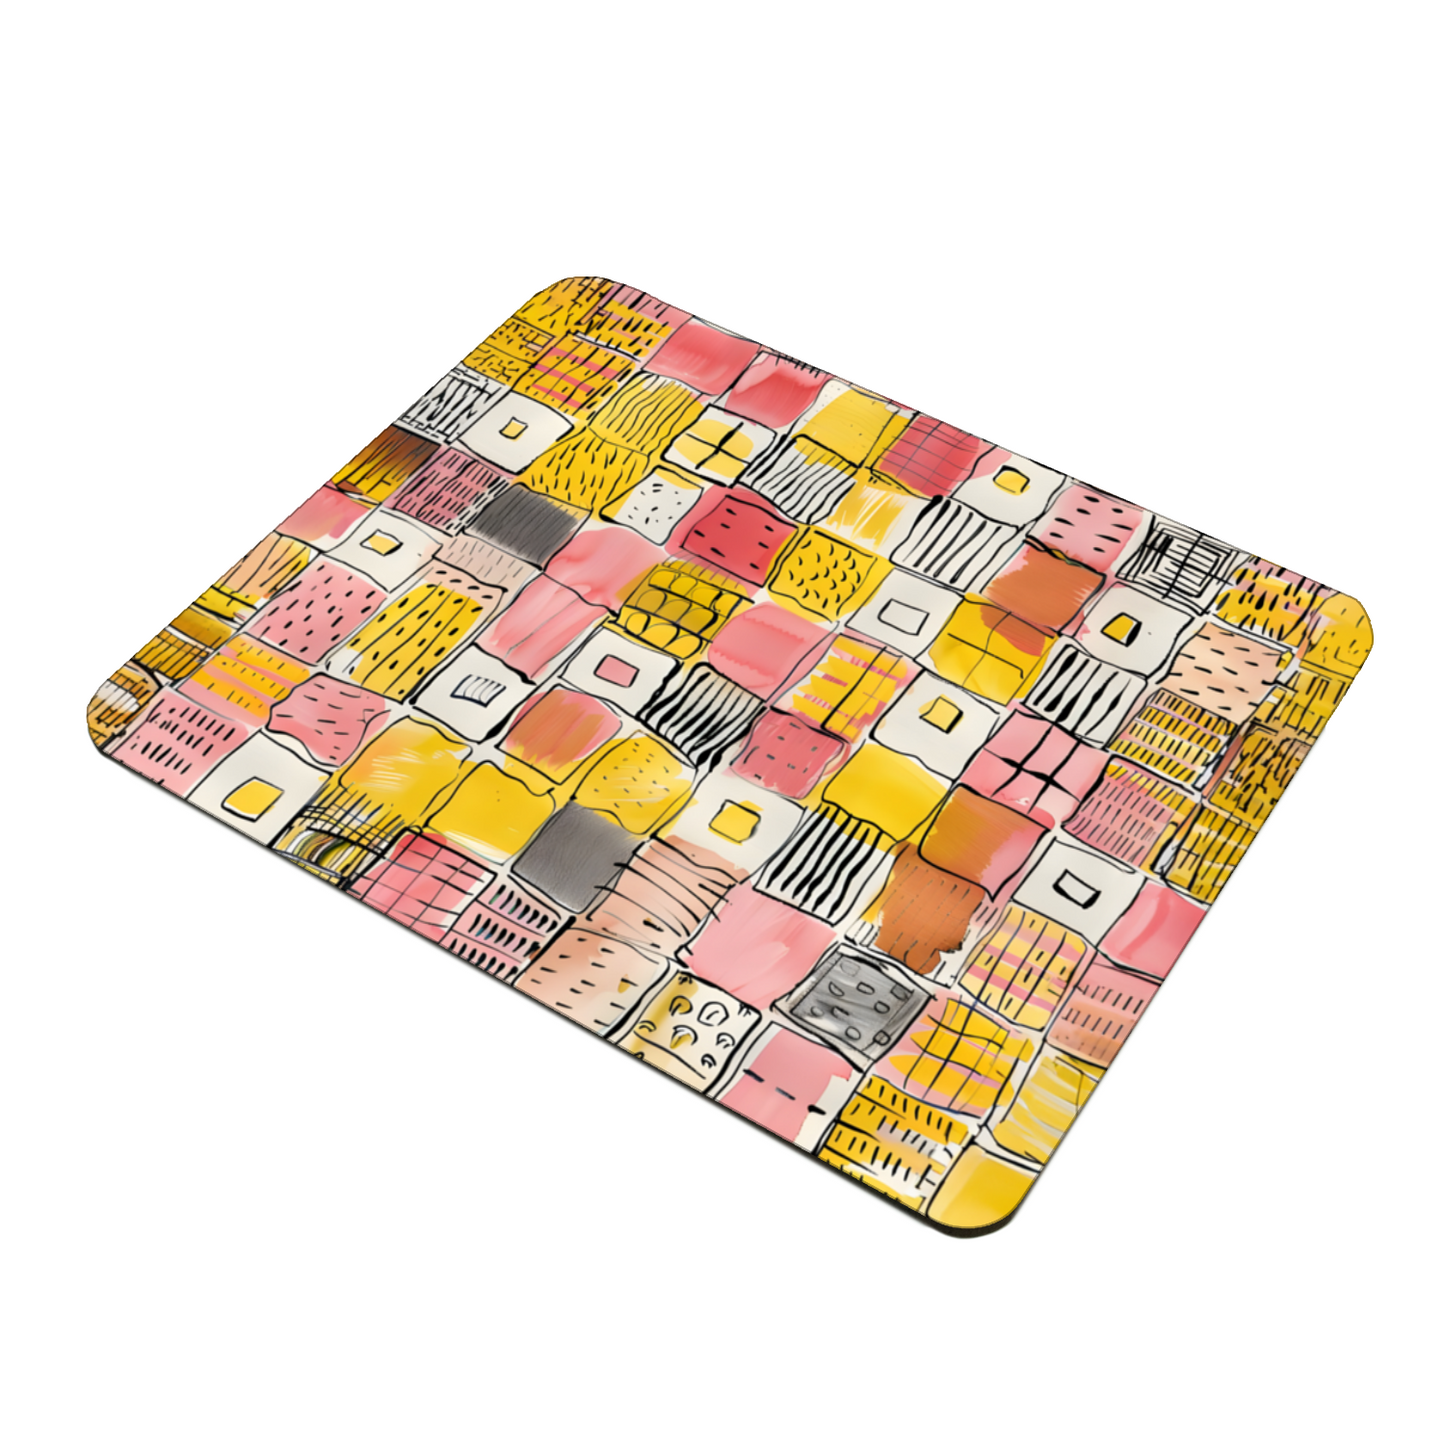 Patchwork Delight Wooden Placemat